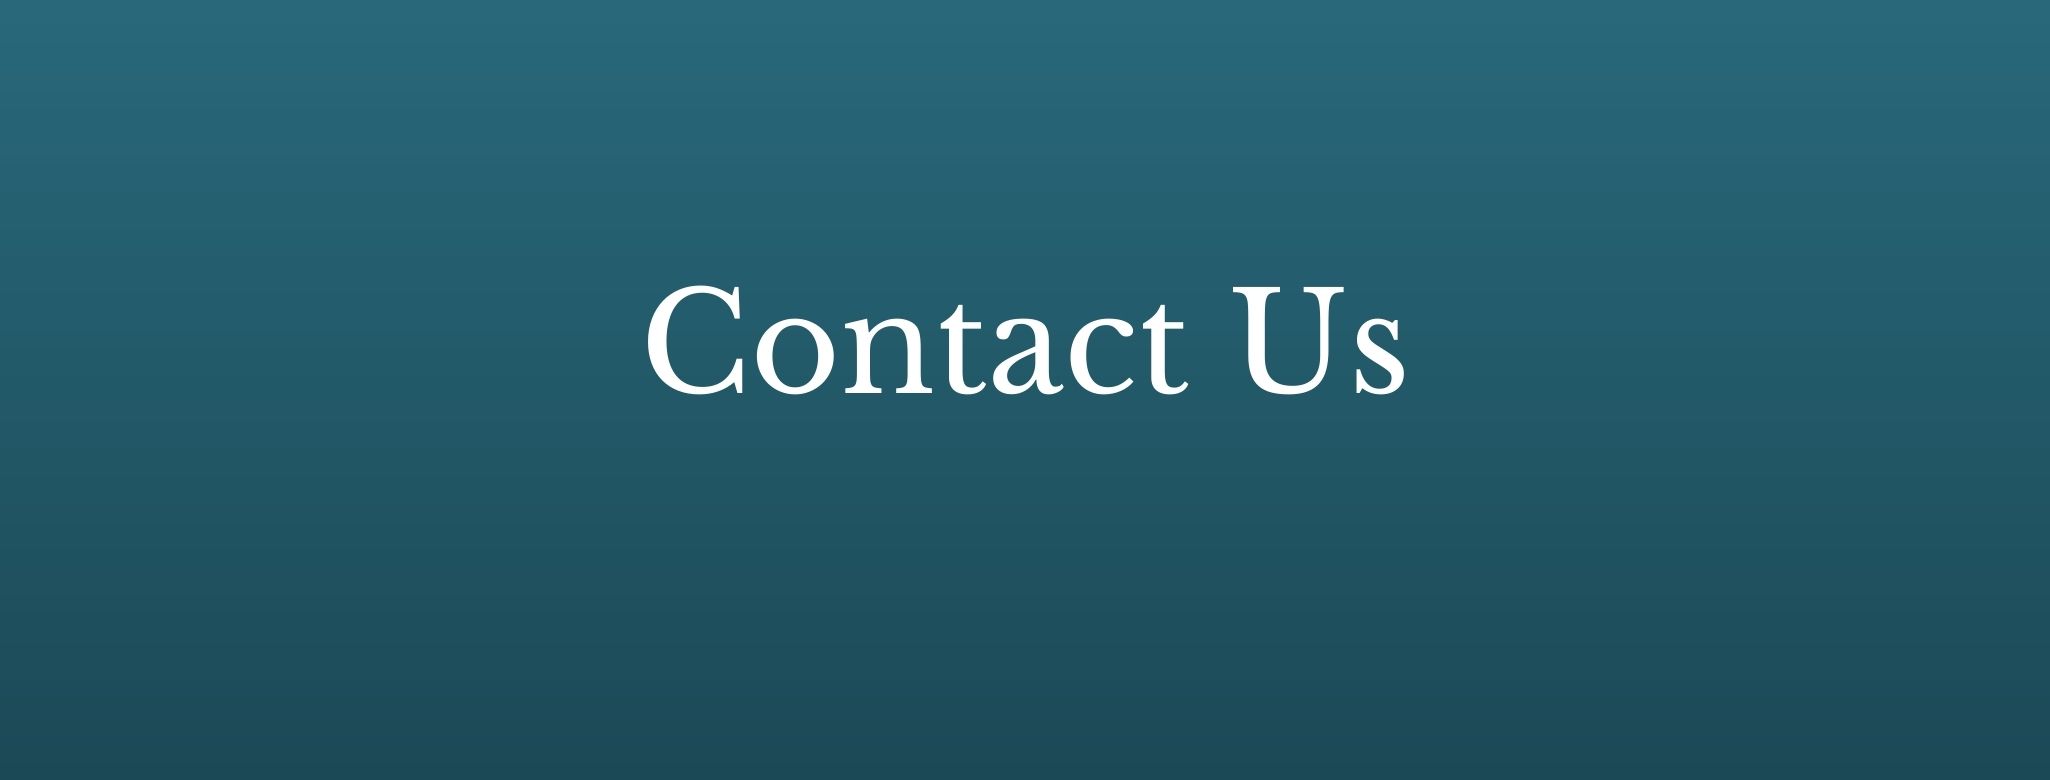 Contact Us Banner Image Teal Background